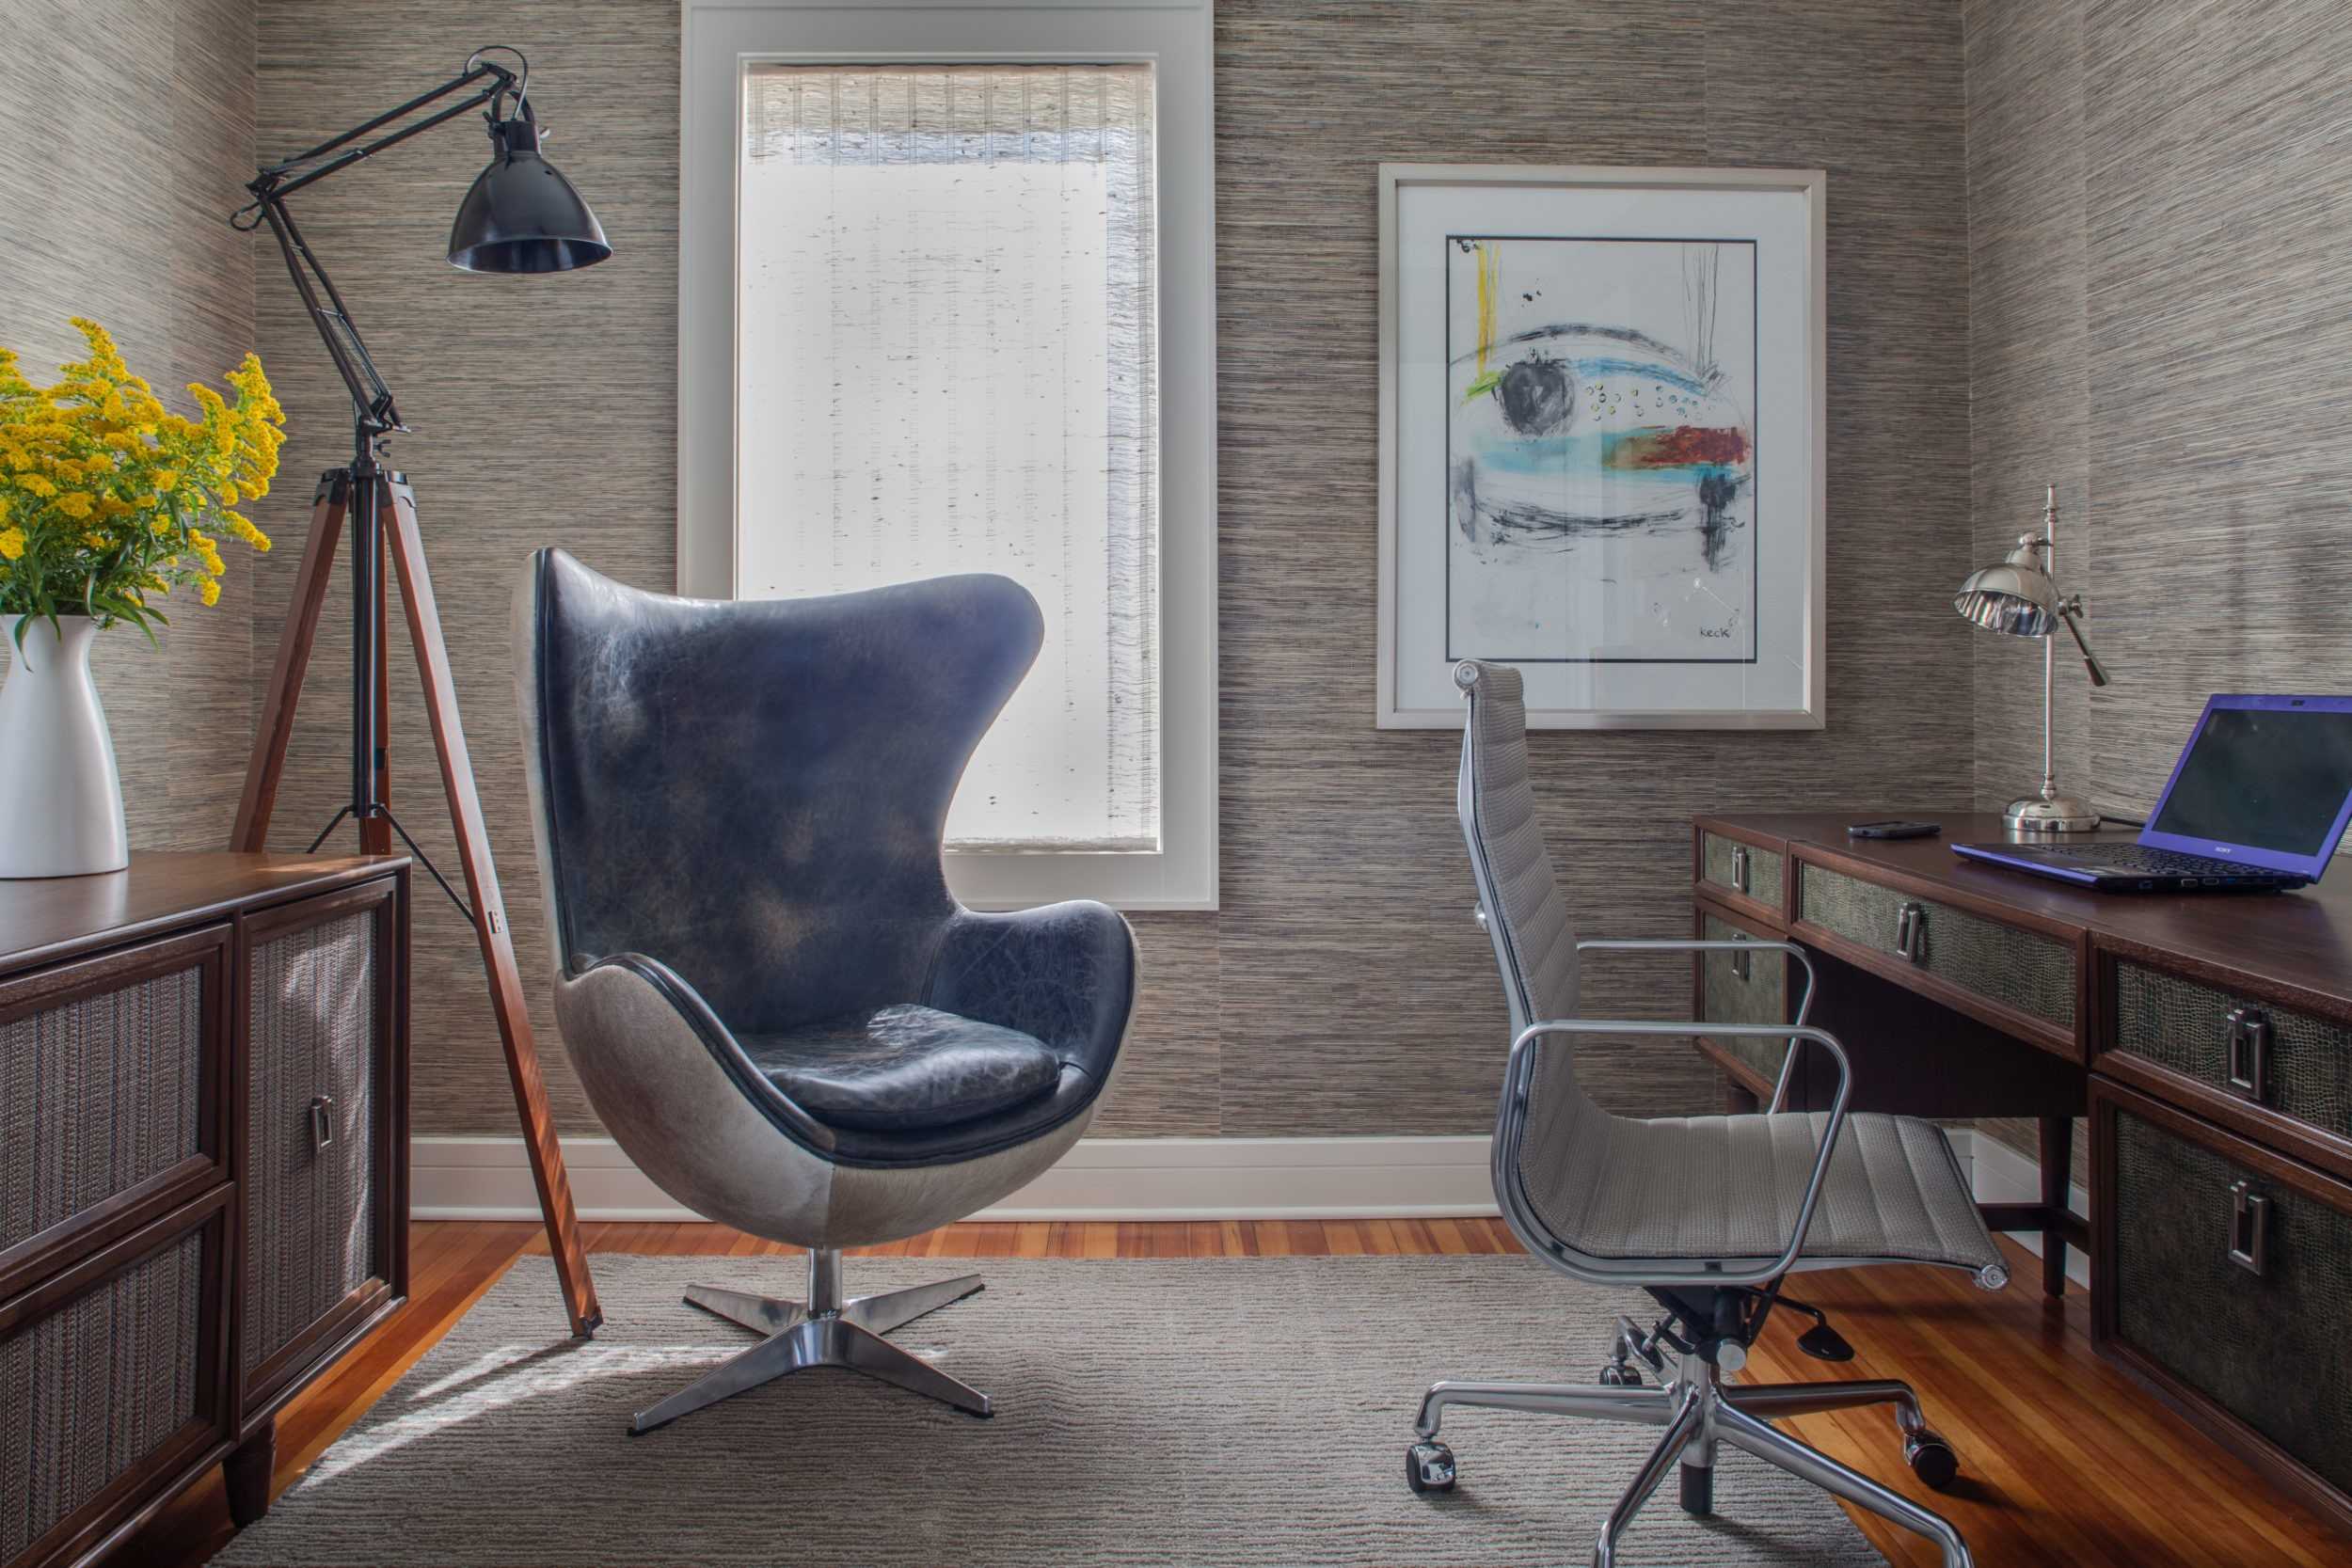 Everything You Need to Make Your Home Office Design Work for You